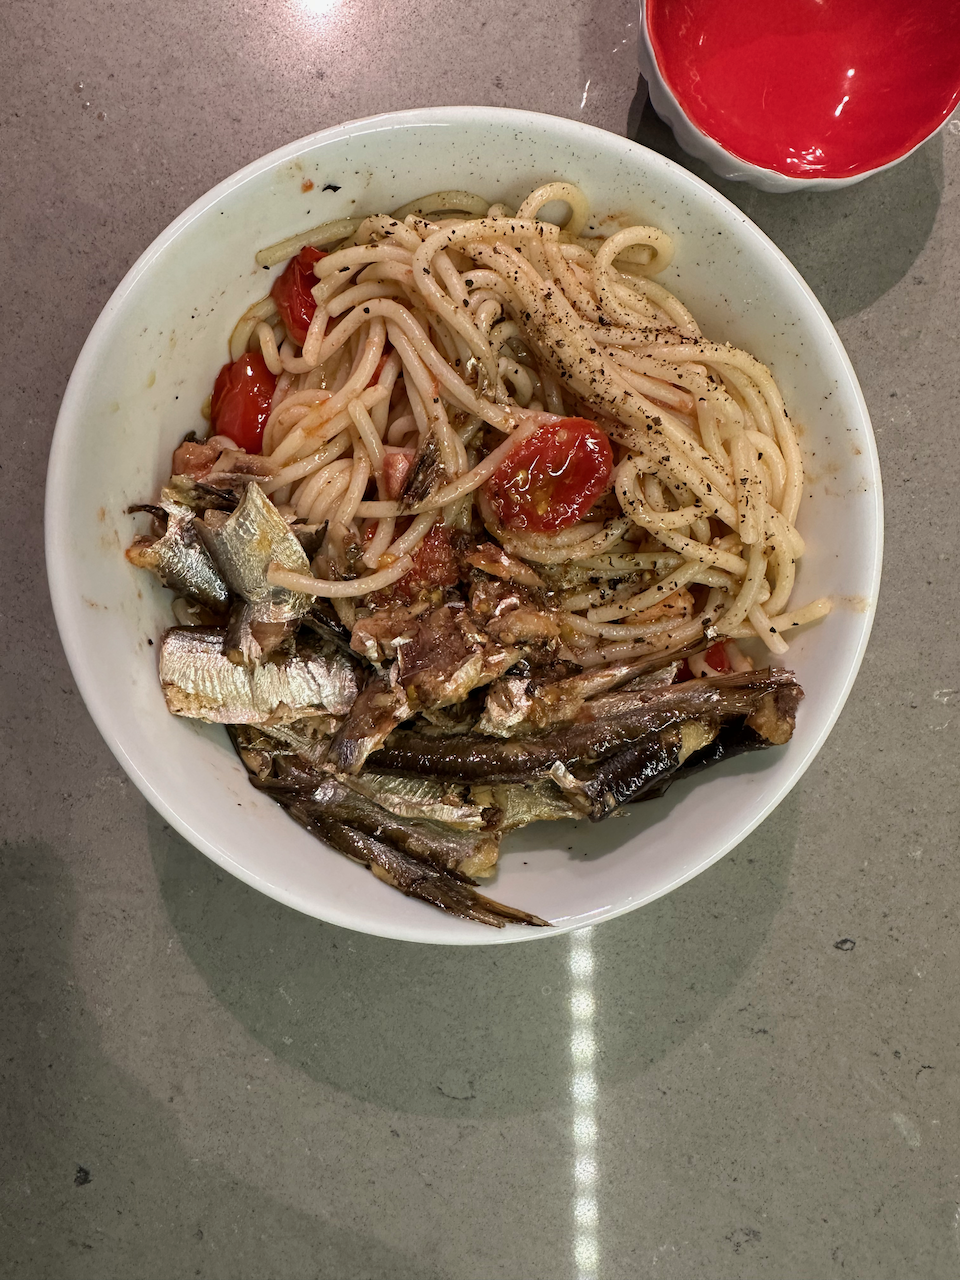 An overhead photo of a white bowl on a gray countertop. Spaghetti noodles fill most of the bowl and are topped with lightly cooked, slices of cherry red tomato. Beside them are several slices of small, silvery sardine fillets.